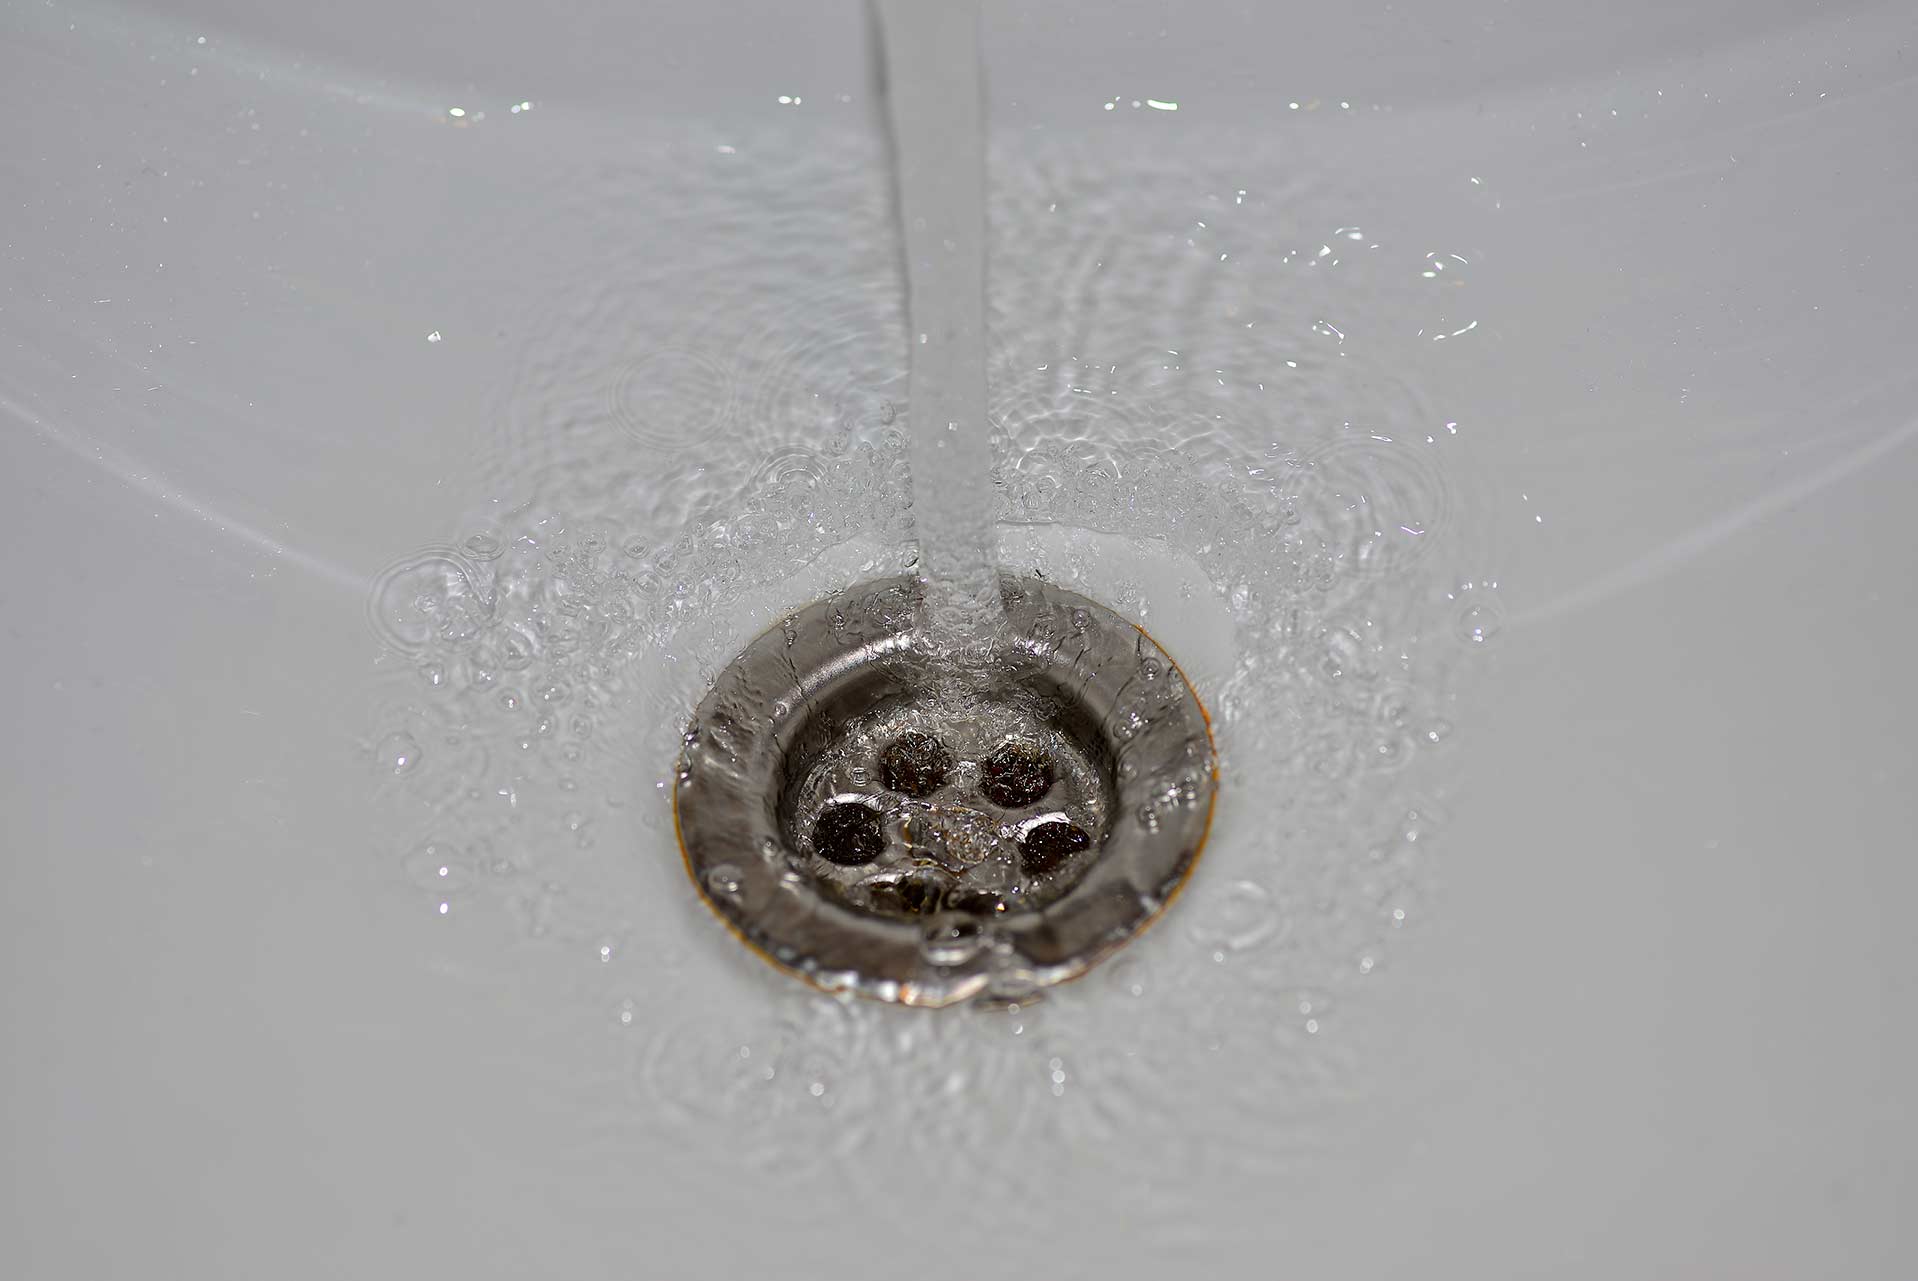 A2B Drains provides services to unblock blocked sinks and drains for properties in Dagenham.